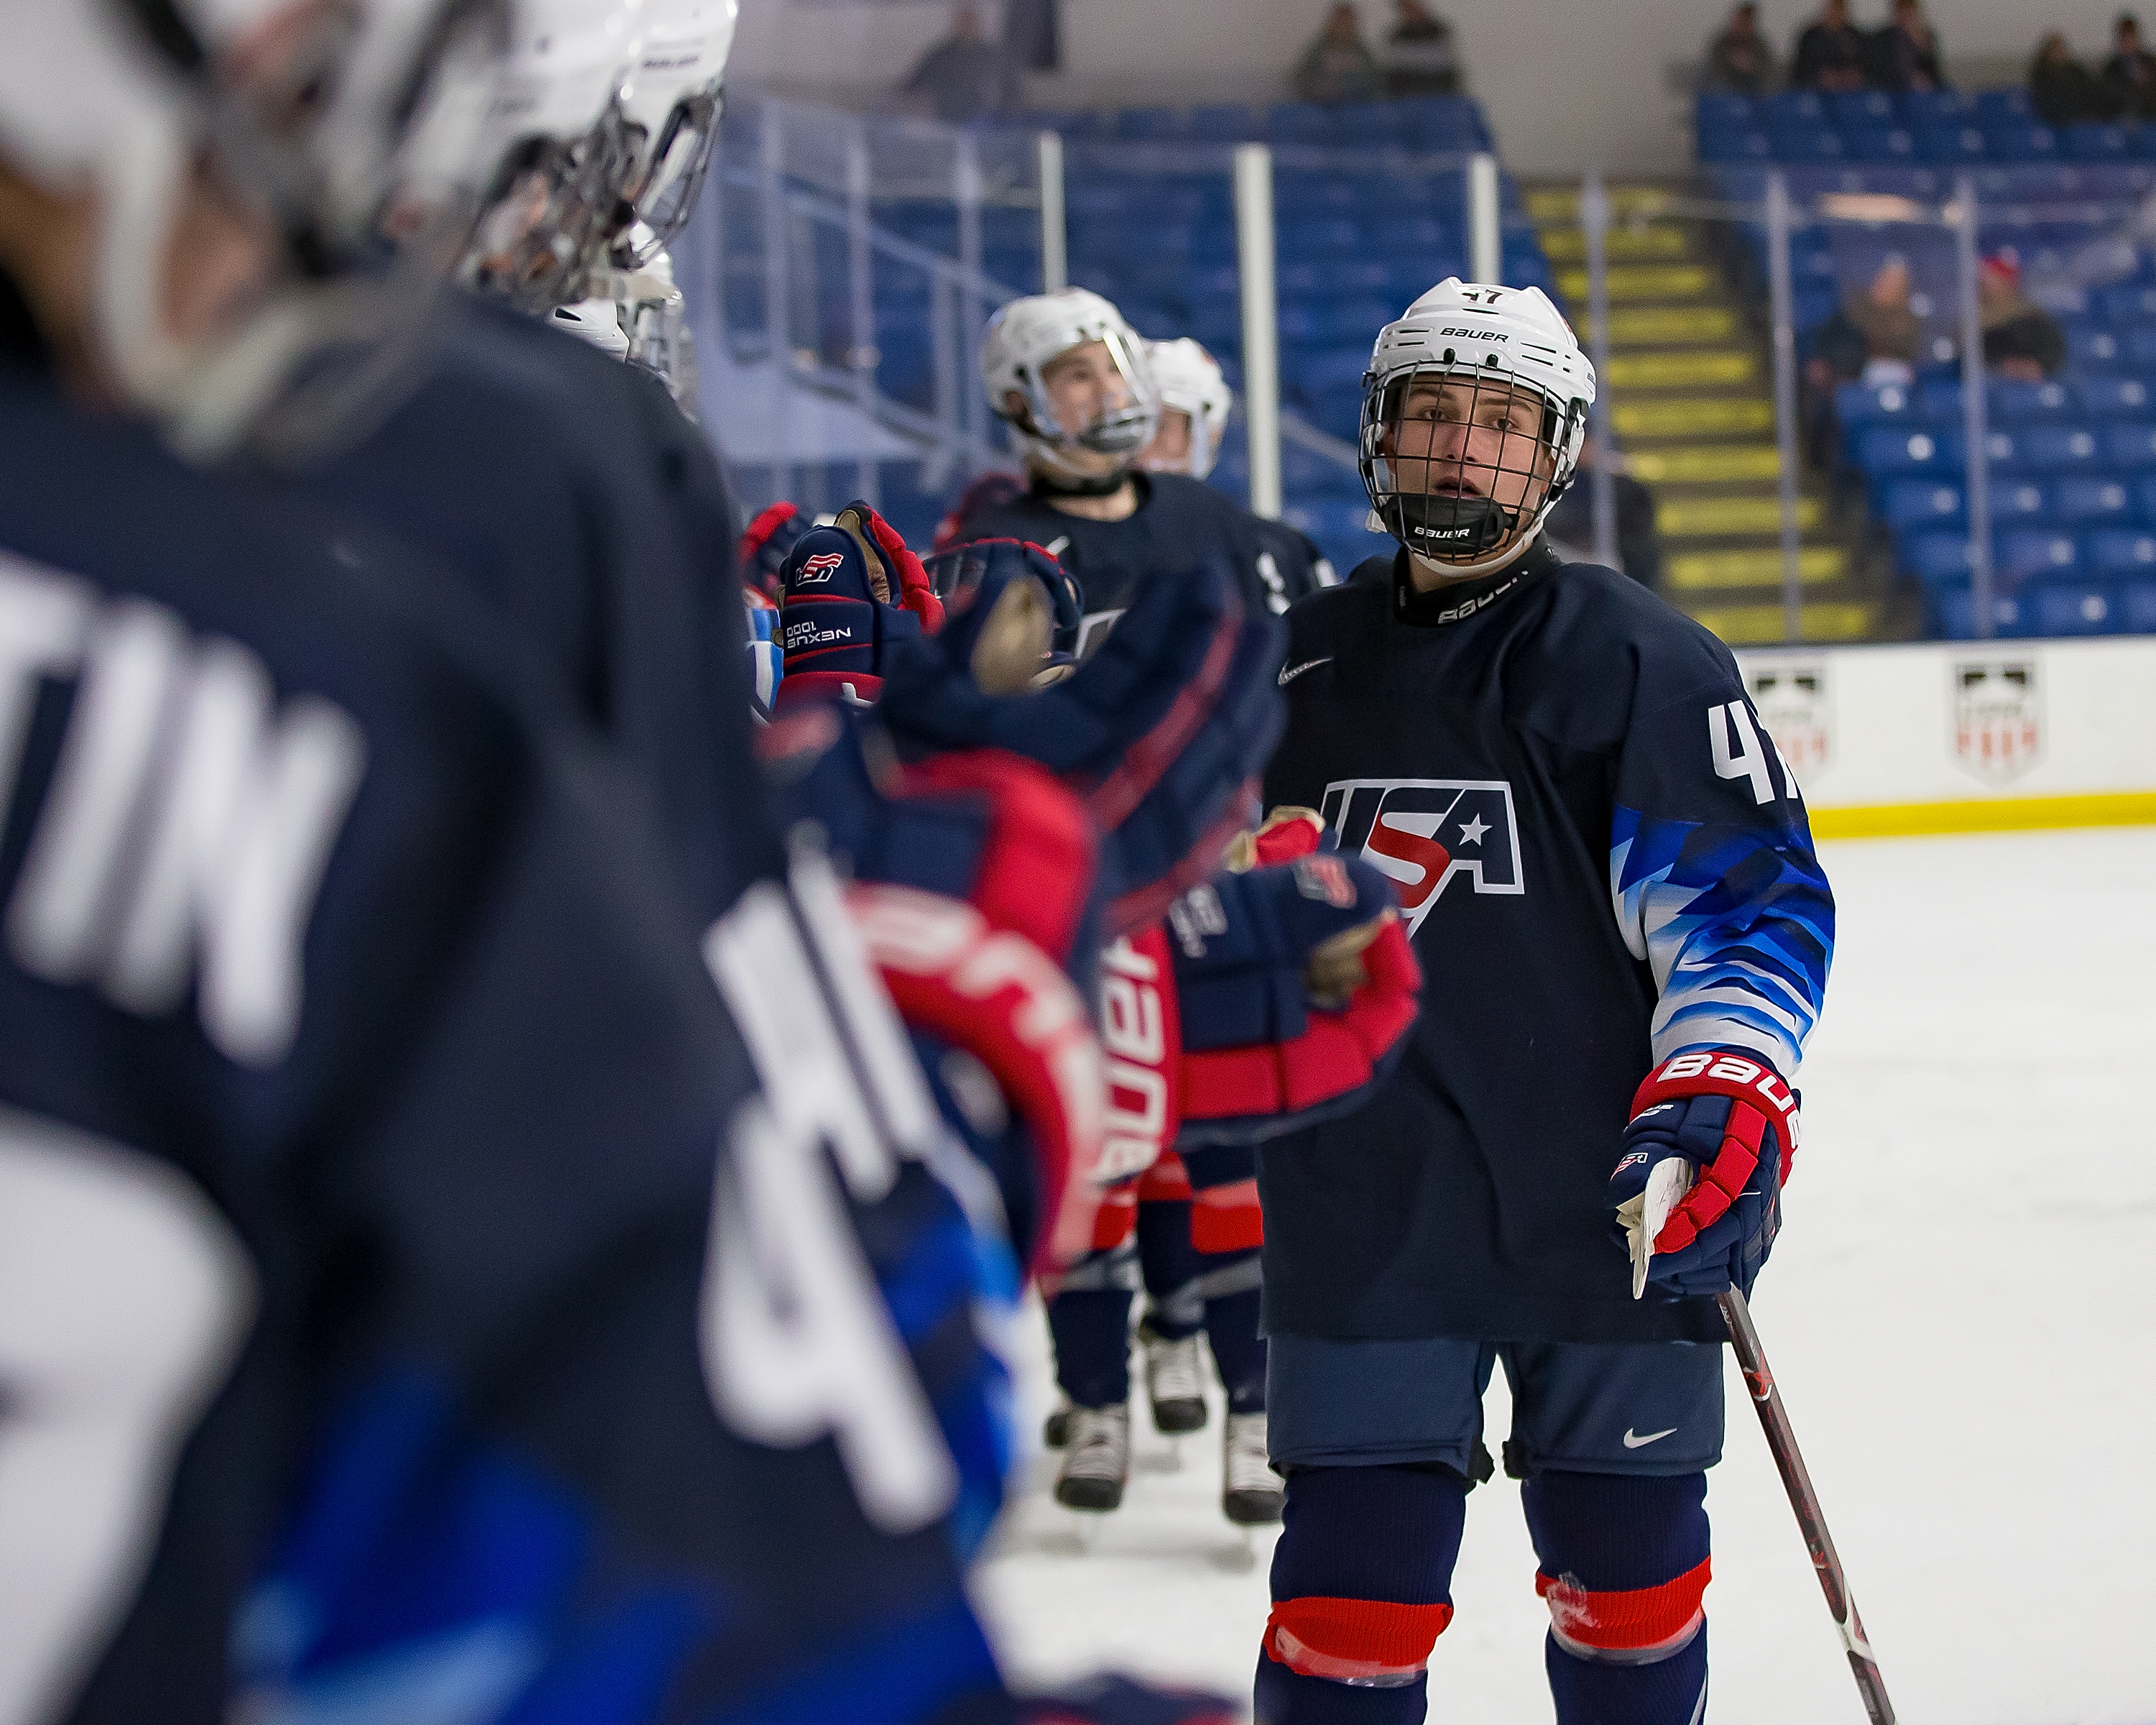 Thomas Bordeleau #47 of the U.S. Nationals celebrates a second period goal with teammates on the bench against the Switzerland Nationals during day-2 of game two of the 2018 Under-17 Four Nations Tournament at USA Hockey Arena on December 12, 2018 in Plymouth, Michigan. USA defeated Switzerland 3-1.